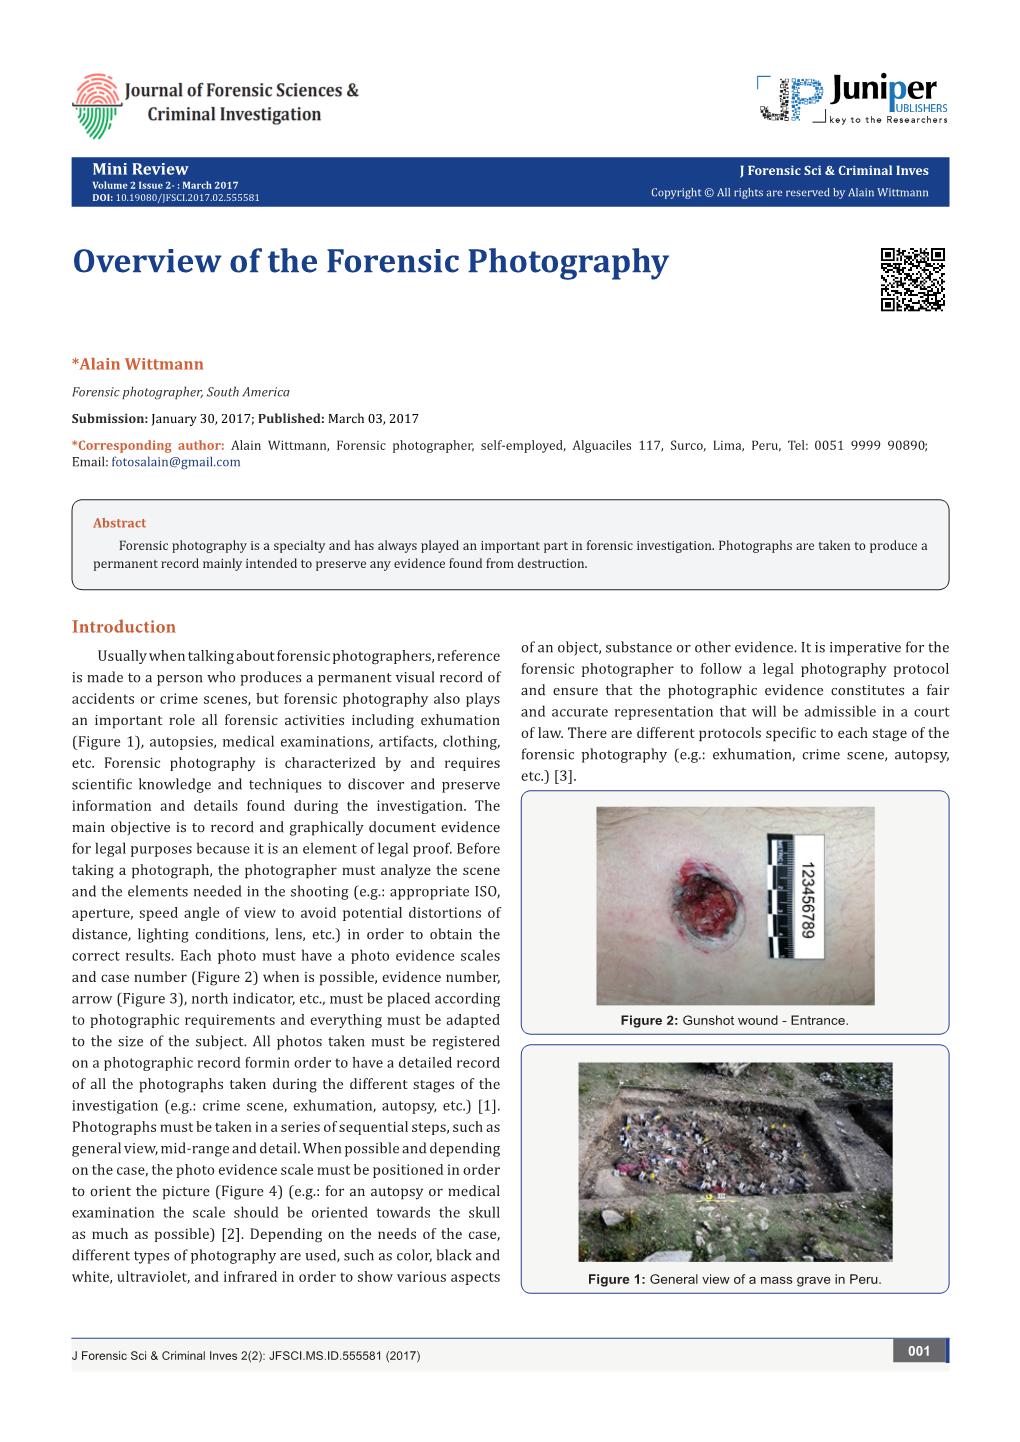 Overview of the Forensic Photography